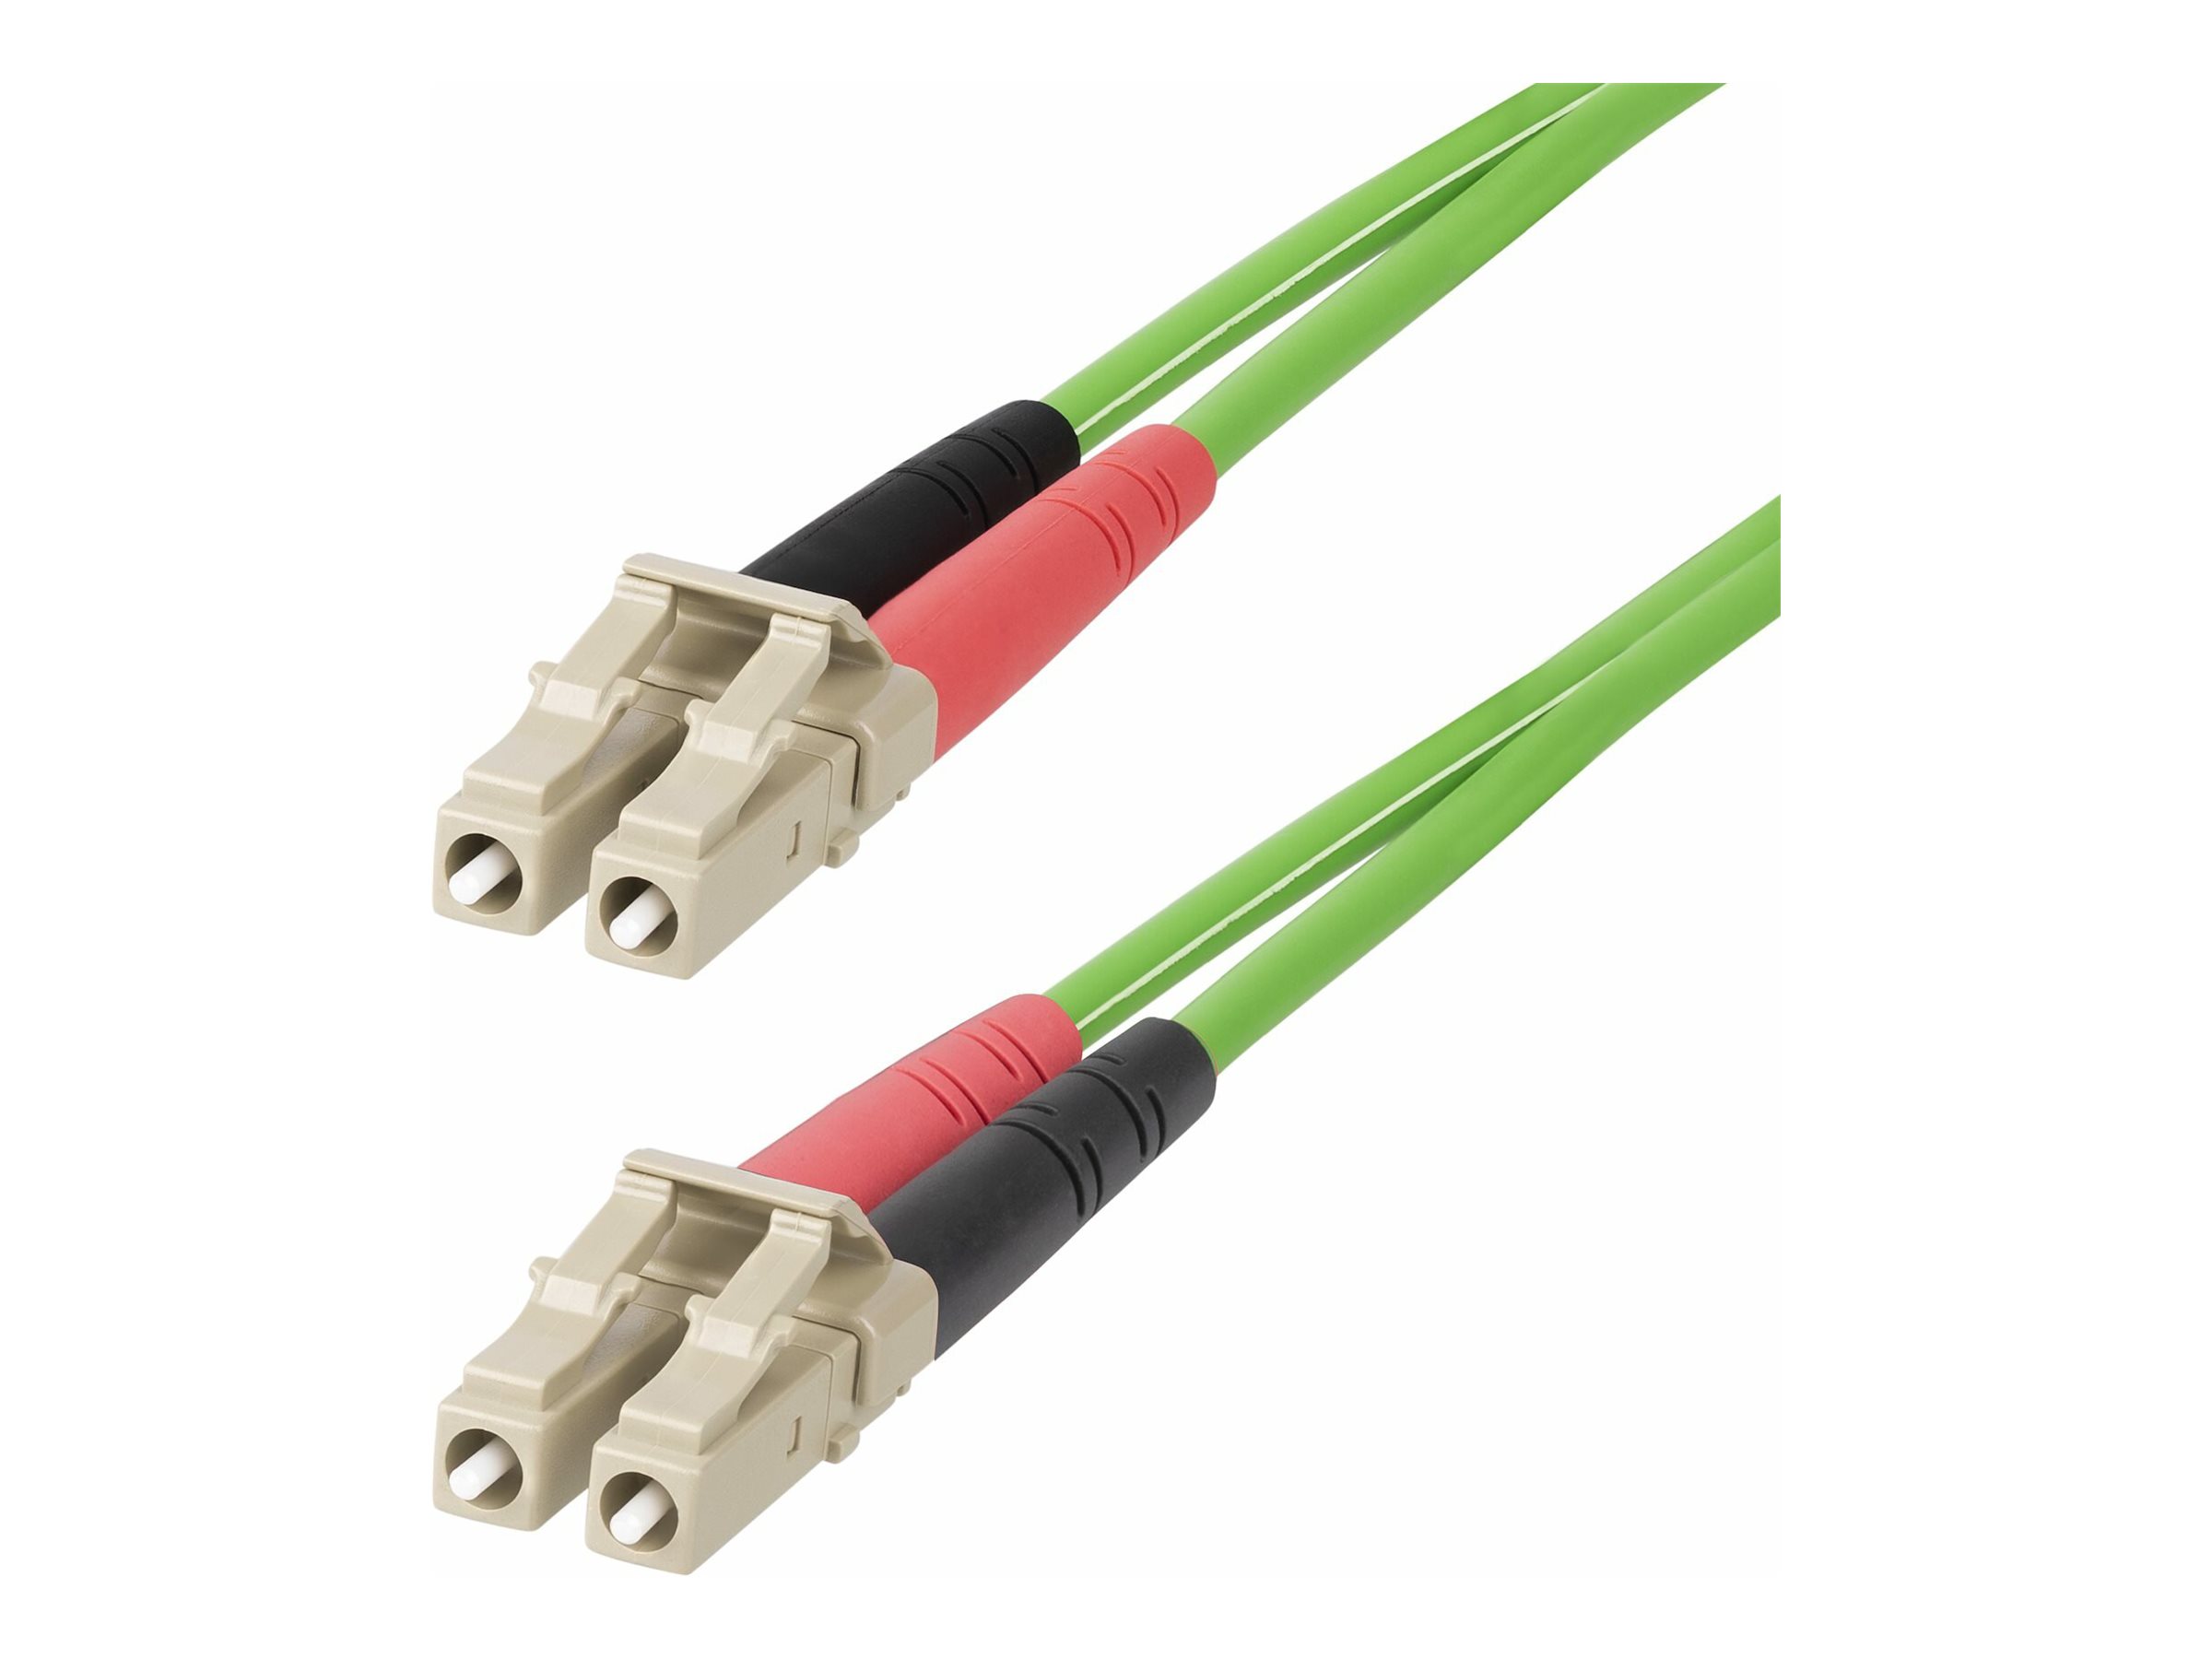 StarTech.com 25m (82ft) LC to LC (UPC) OM5 Multimode Fiber Optic Cable, 50/125m Duplex LOMMF Zipcord, VCSEL, 40G/100G, Bend Ins